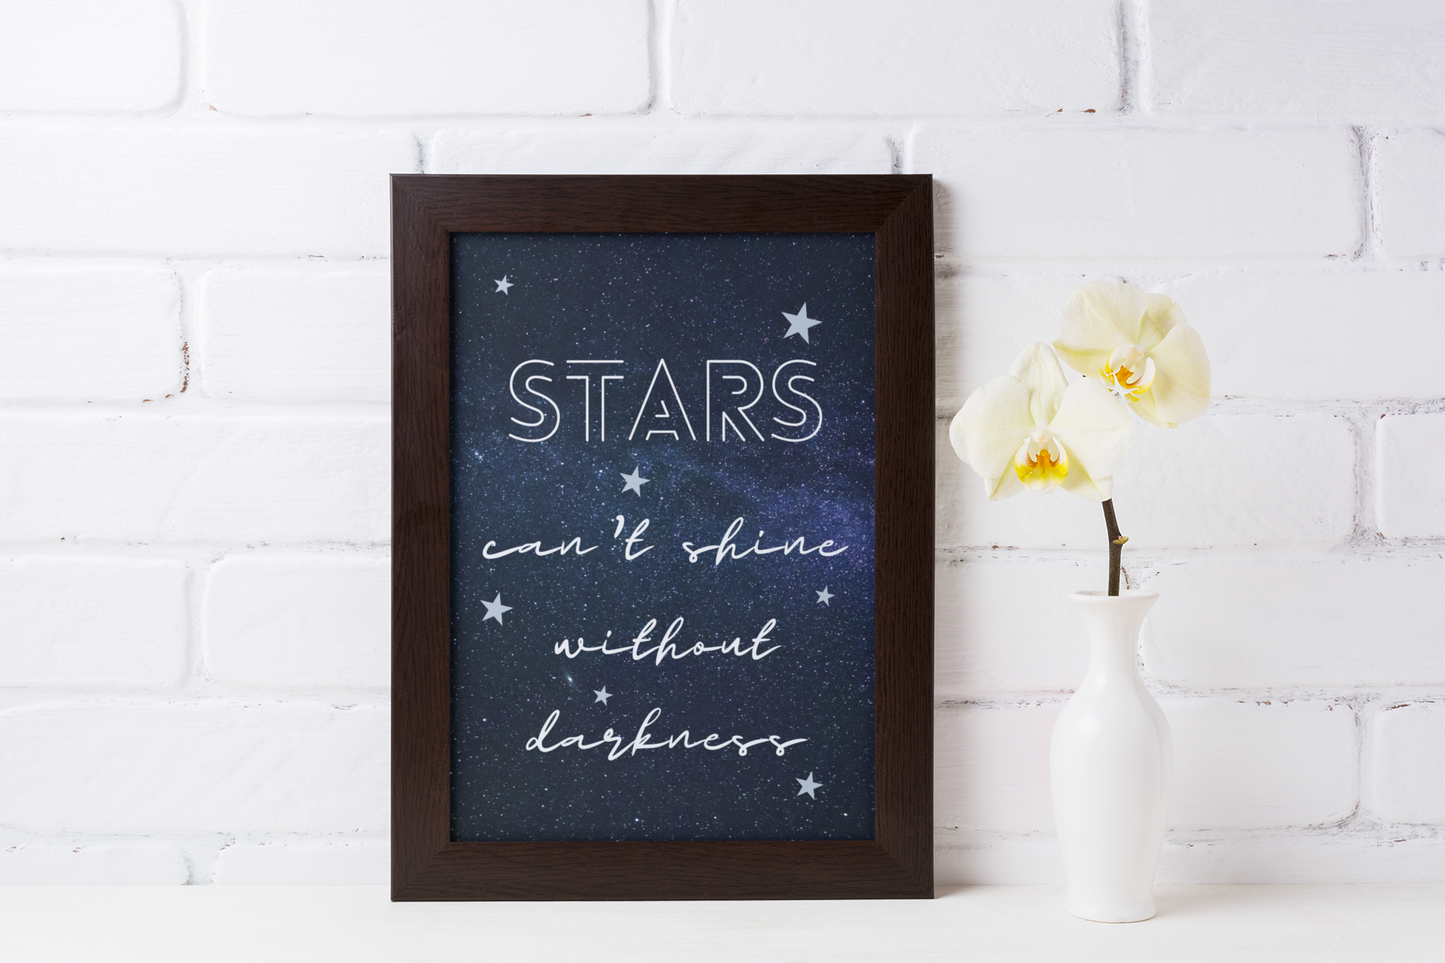 STAR AFFIRMATION 2 - QUIRKY UNIQUE WALL ART featuring Stars and a positive affirmation to remember through the ups and downs of everyday challenges.